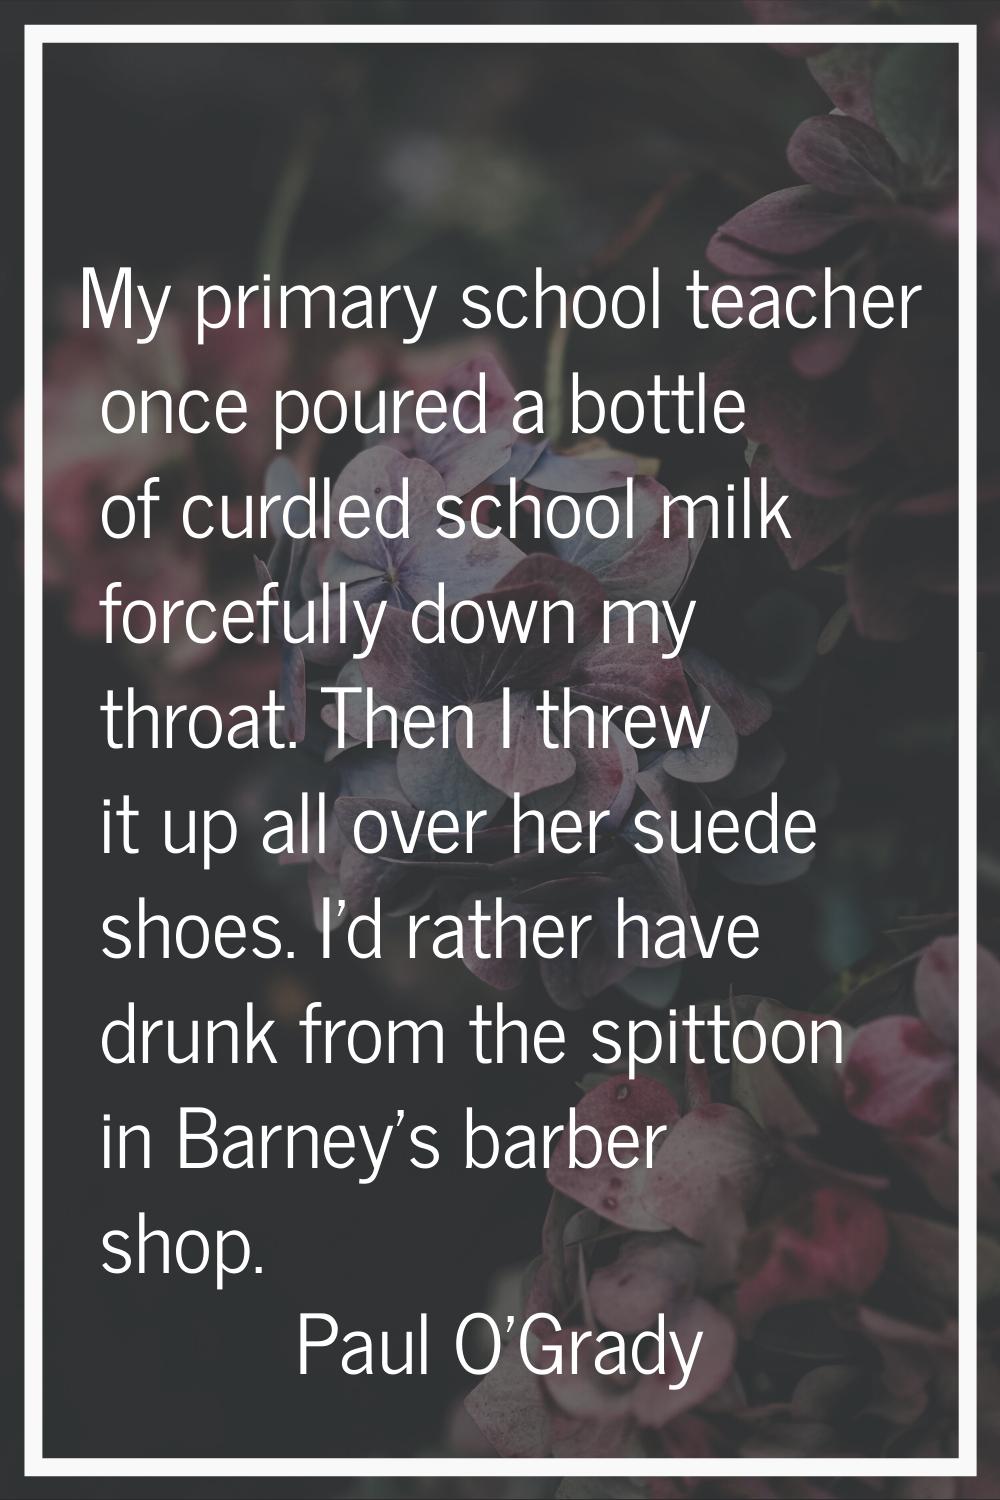 My primary school teacher once poured a bottle of curdled school milk forcefully down my throat. Th